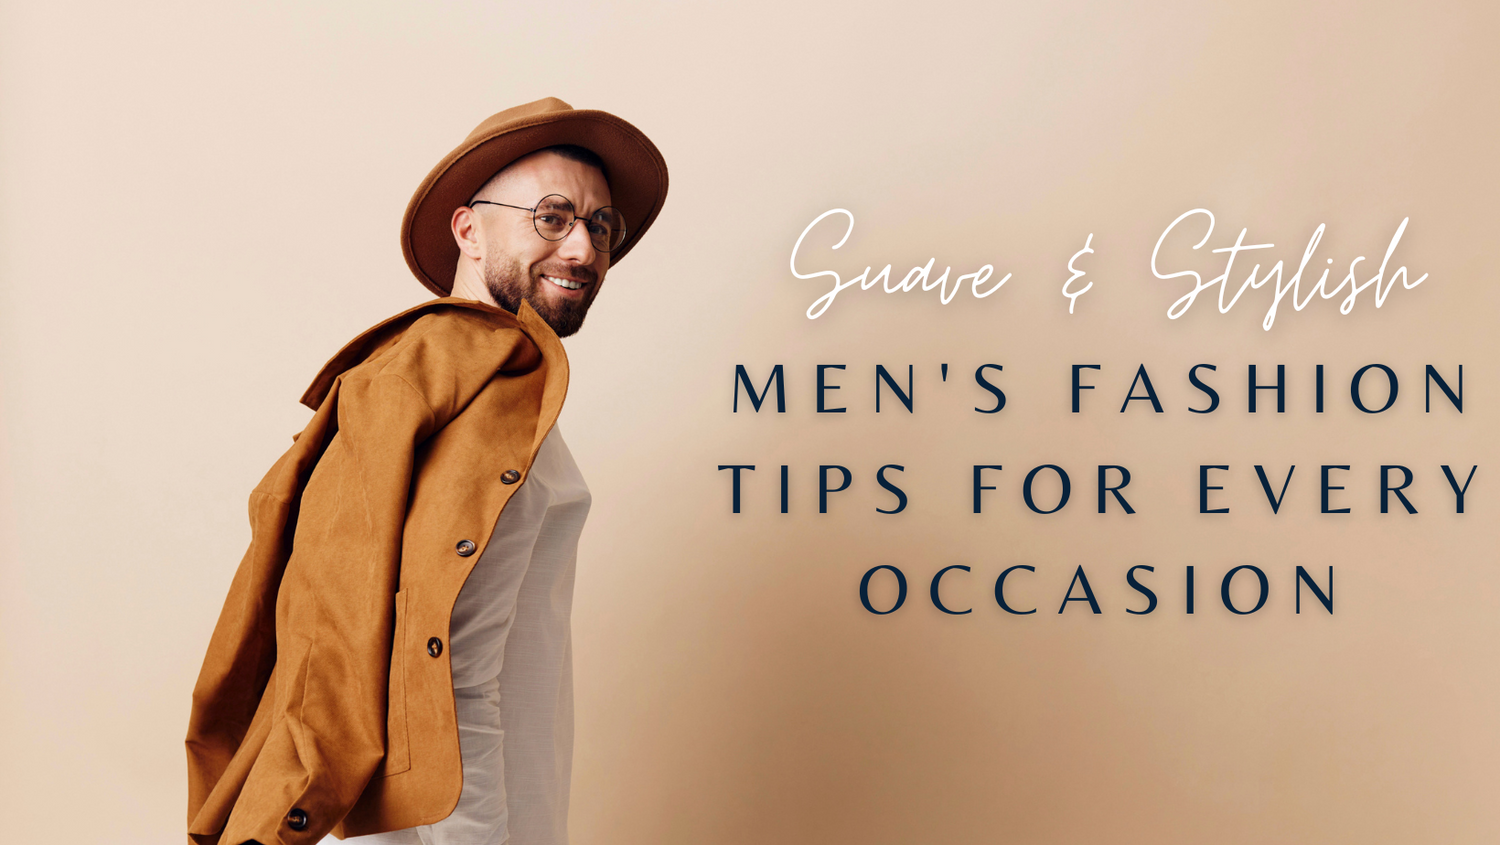 Suave & Stylish: Men's Fashion Tips for Every Occasion